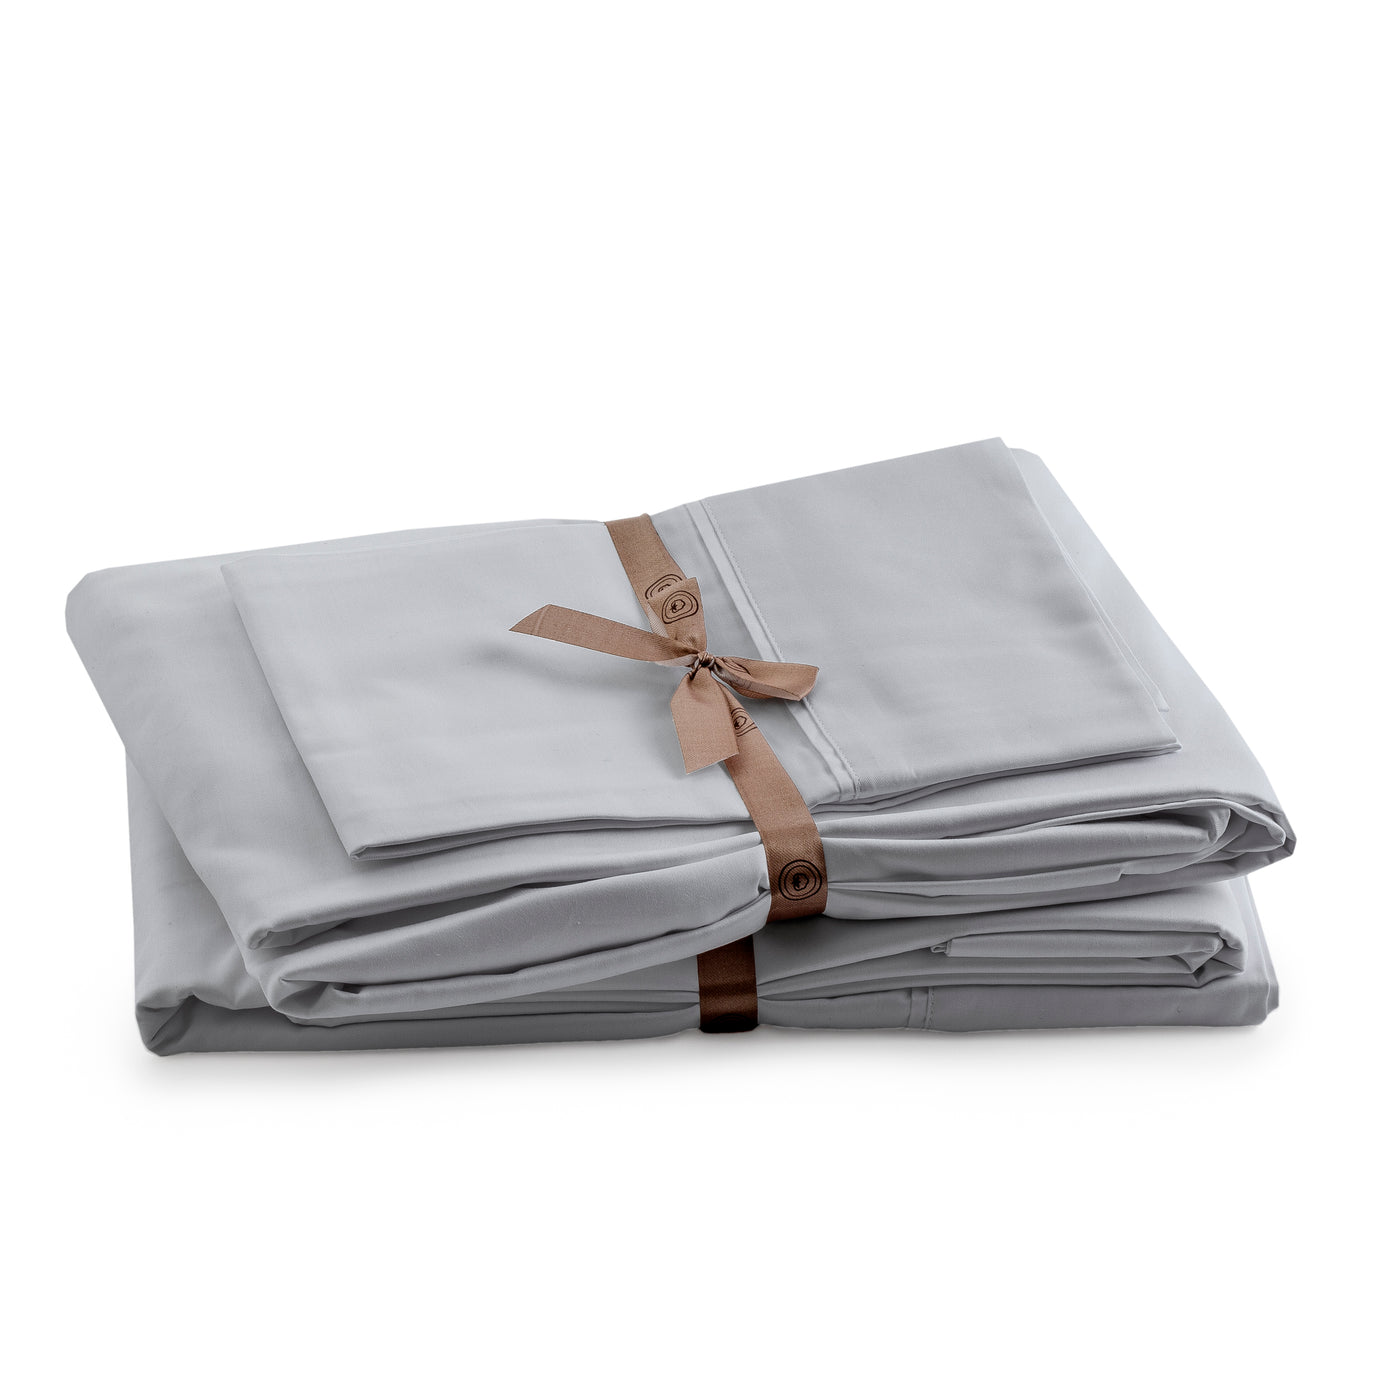 285 Thread Count Percale Bed Sheet Set | Slate